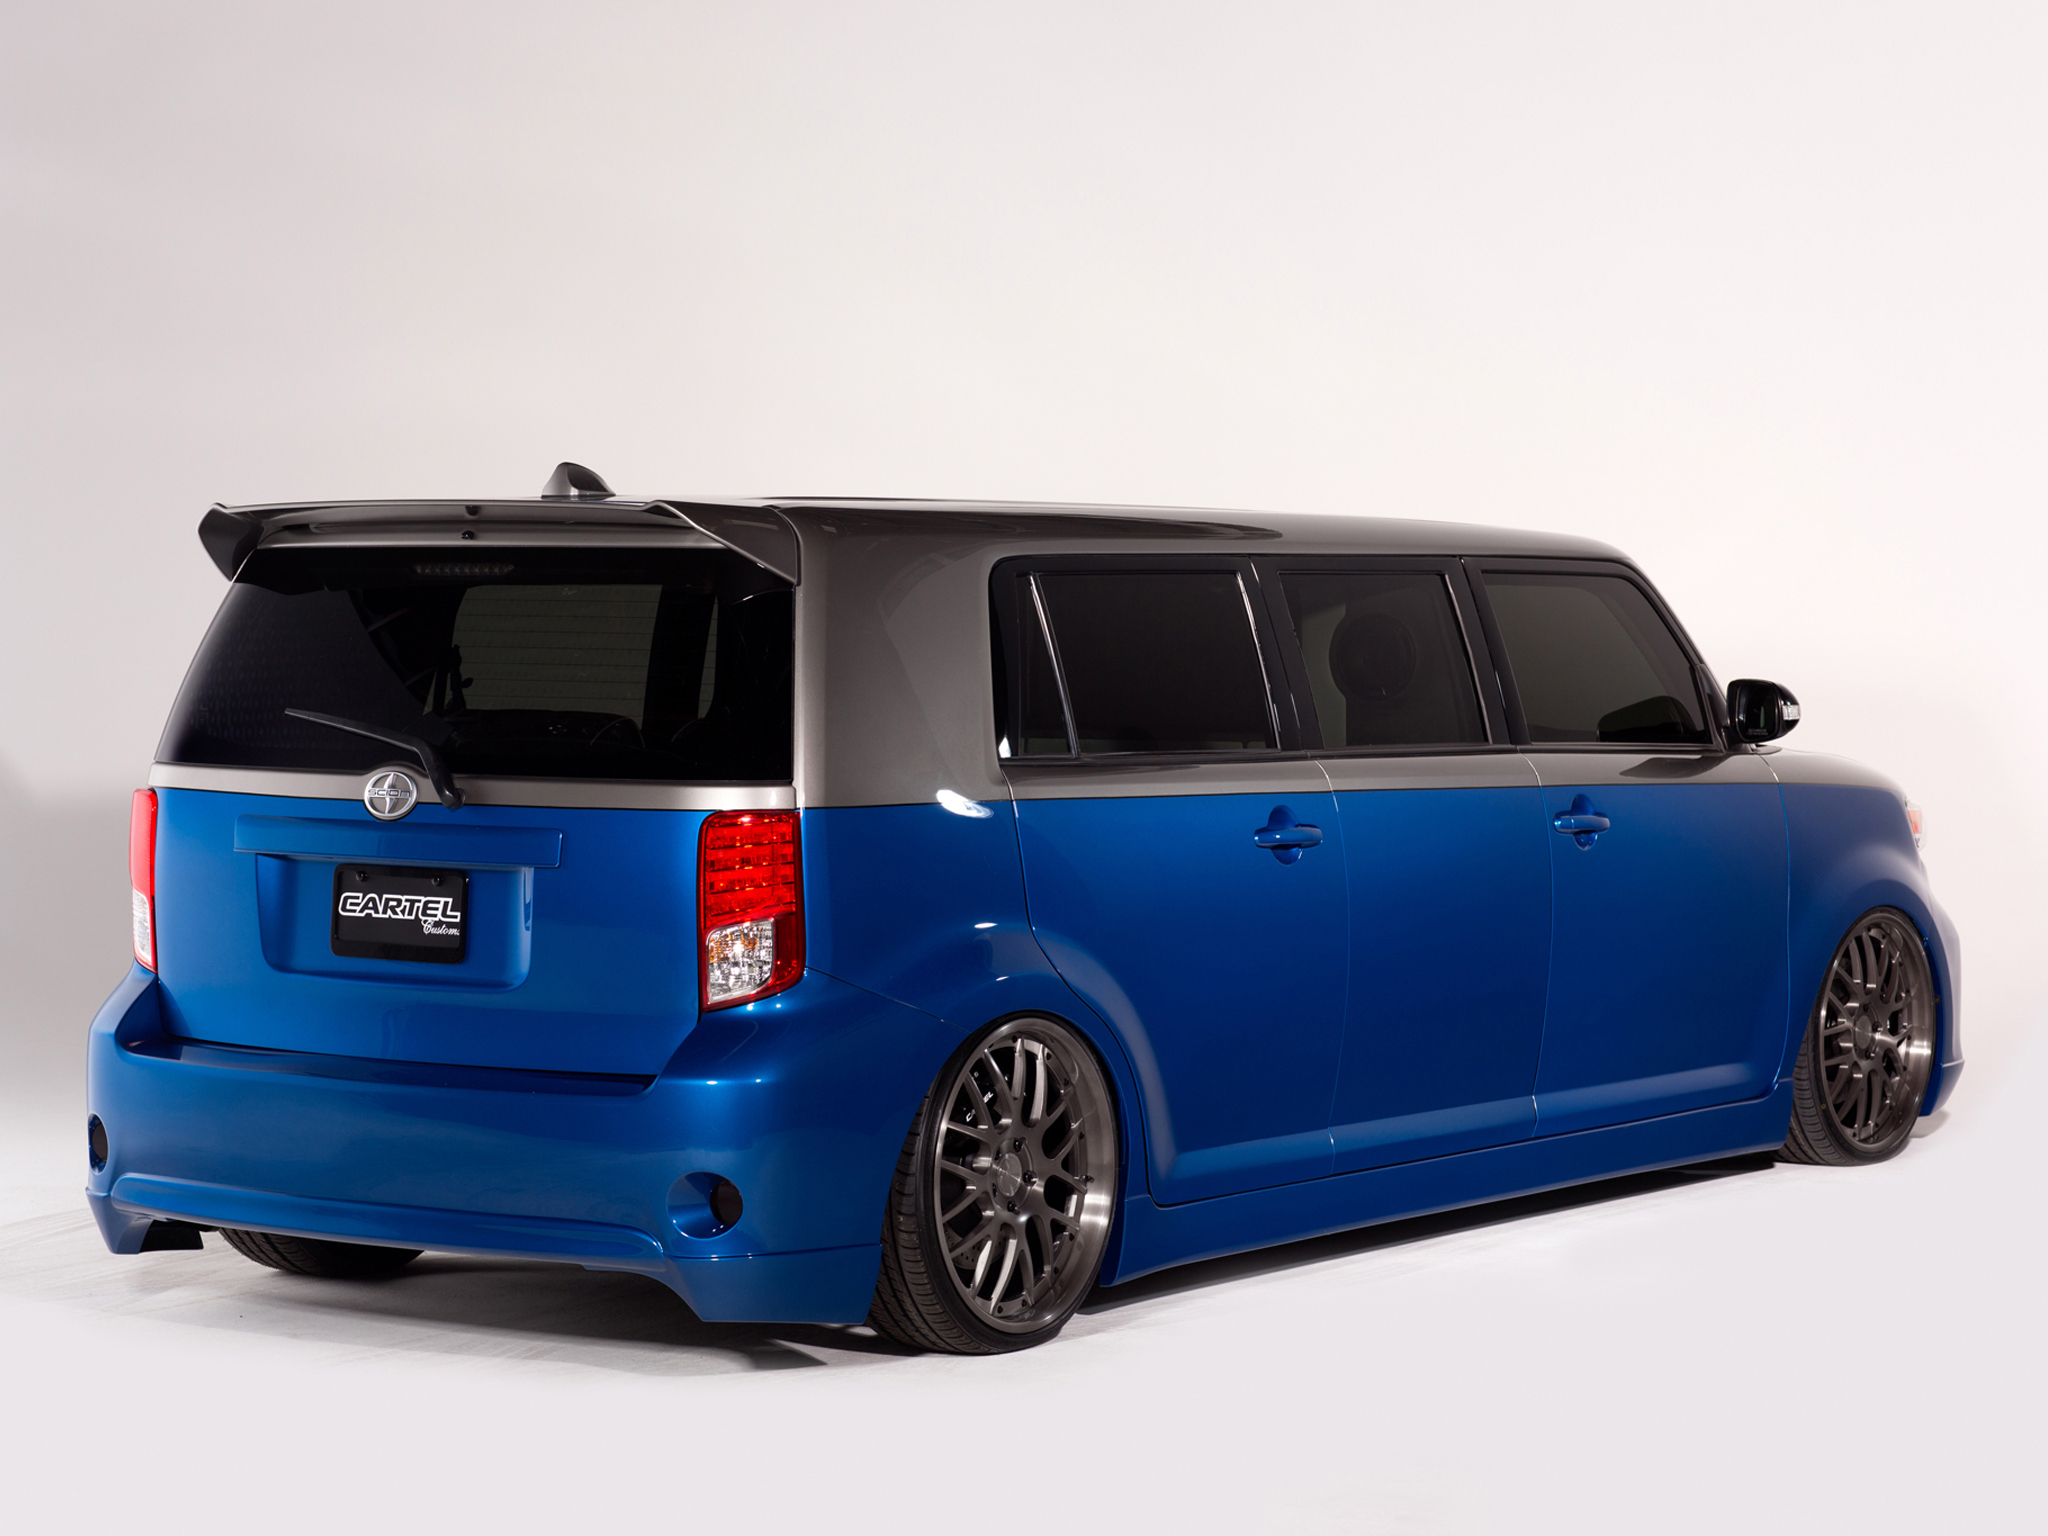 2014, Scion, Xb, Strictly, Business, Cartel, Limousine, Tuning, Suv Wallpaper